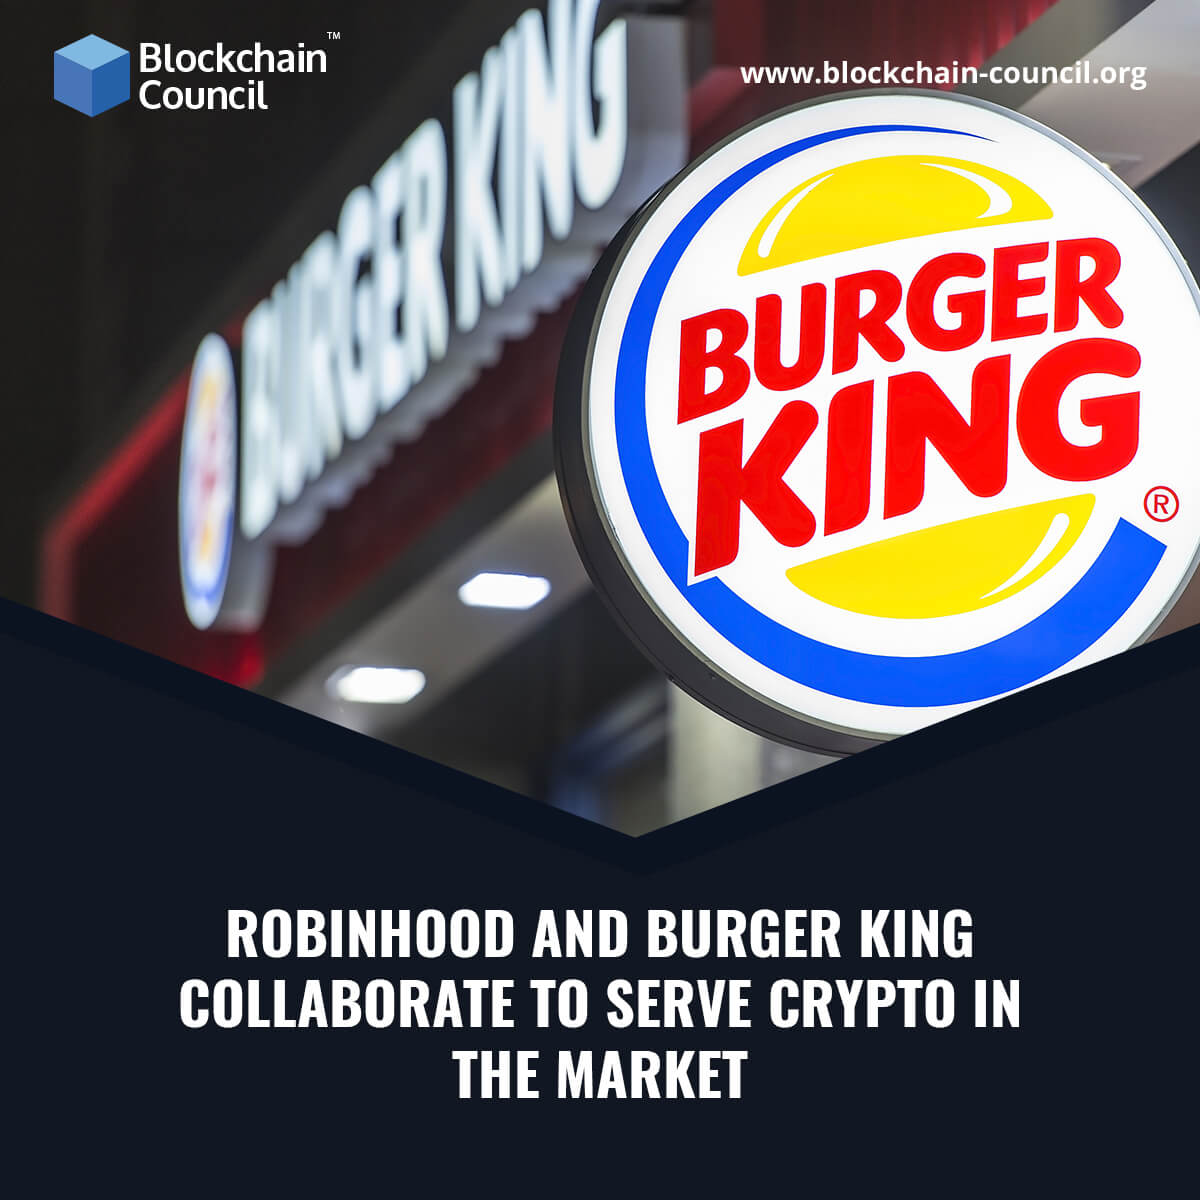 Robinhood and Burger King collaborate to serve crypto in the market